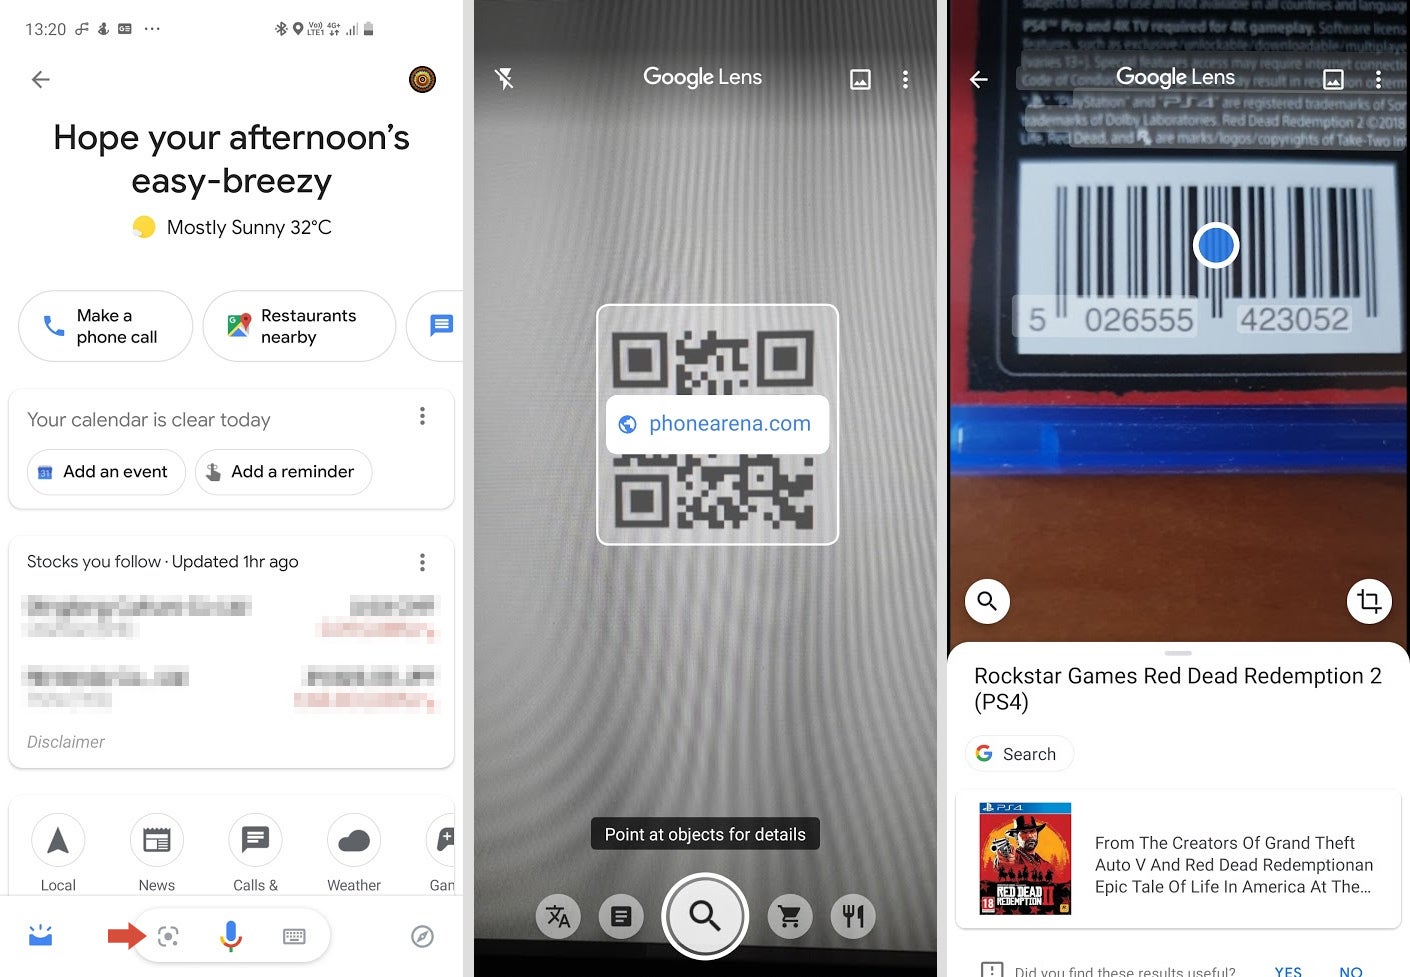 Beak hybrid elect How to scan QR codes and barcodes on iPhone and Android - PhoneArena